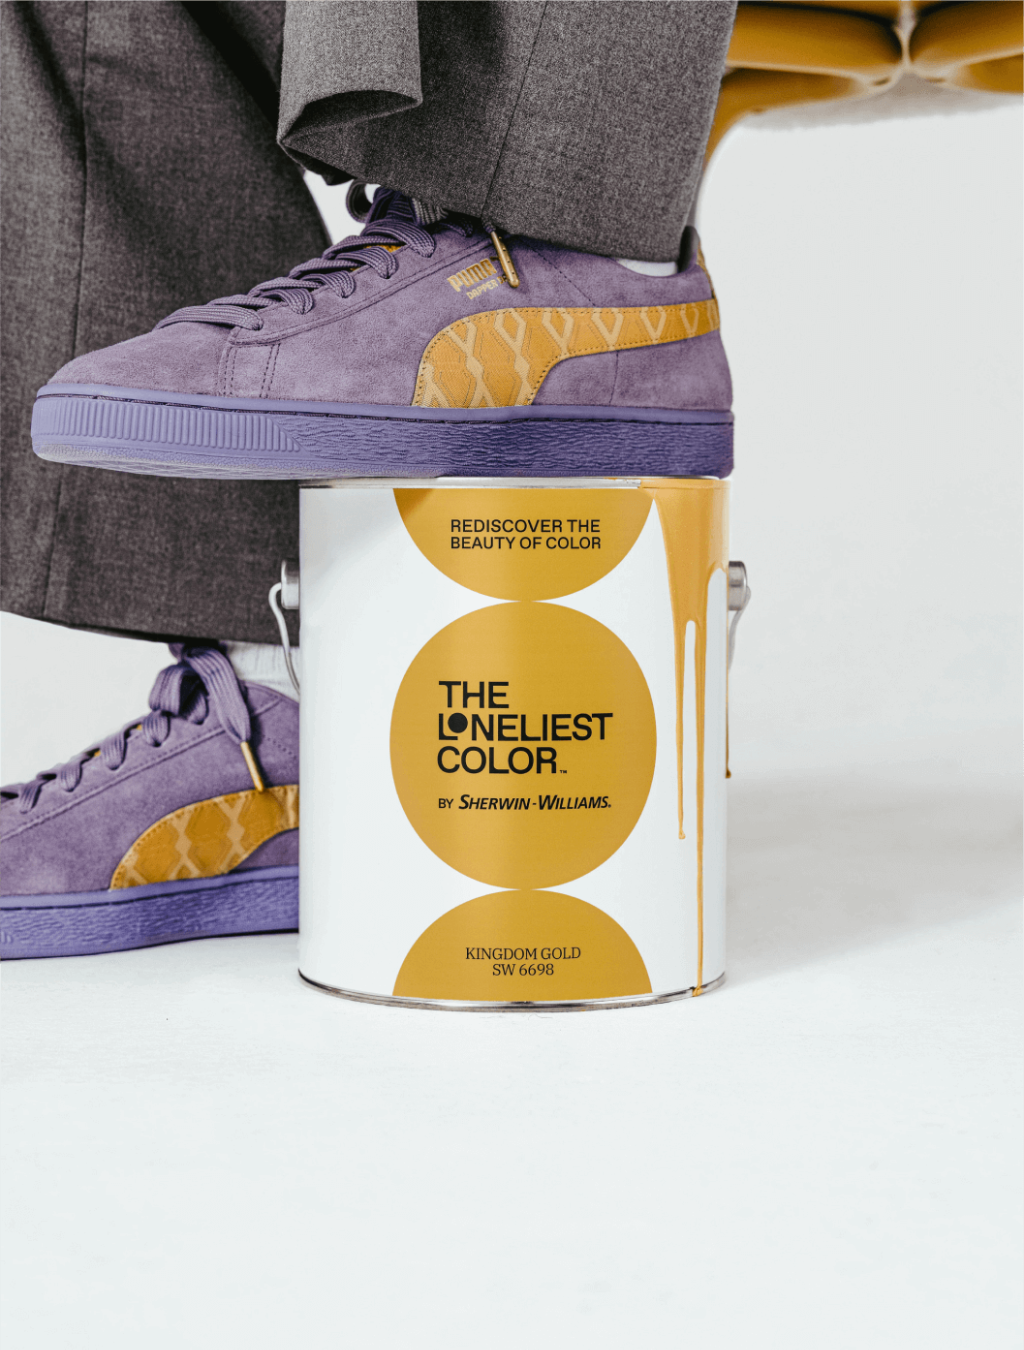 Purple and Kingdom Gold shoes with one foot.png